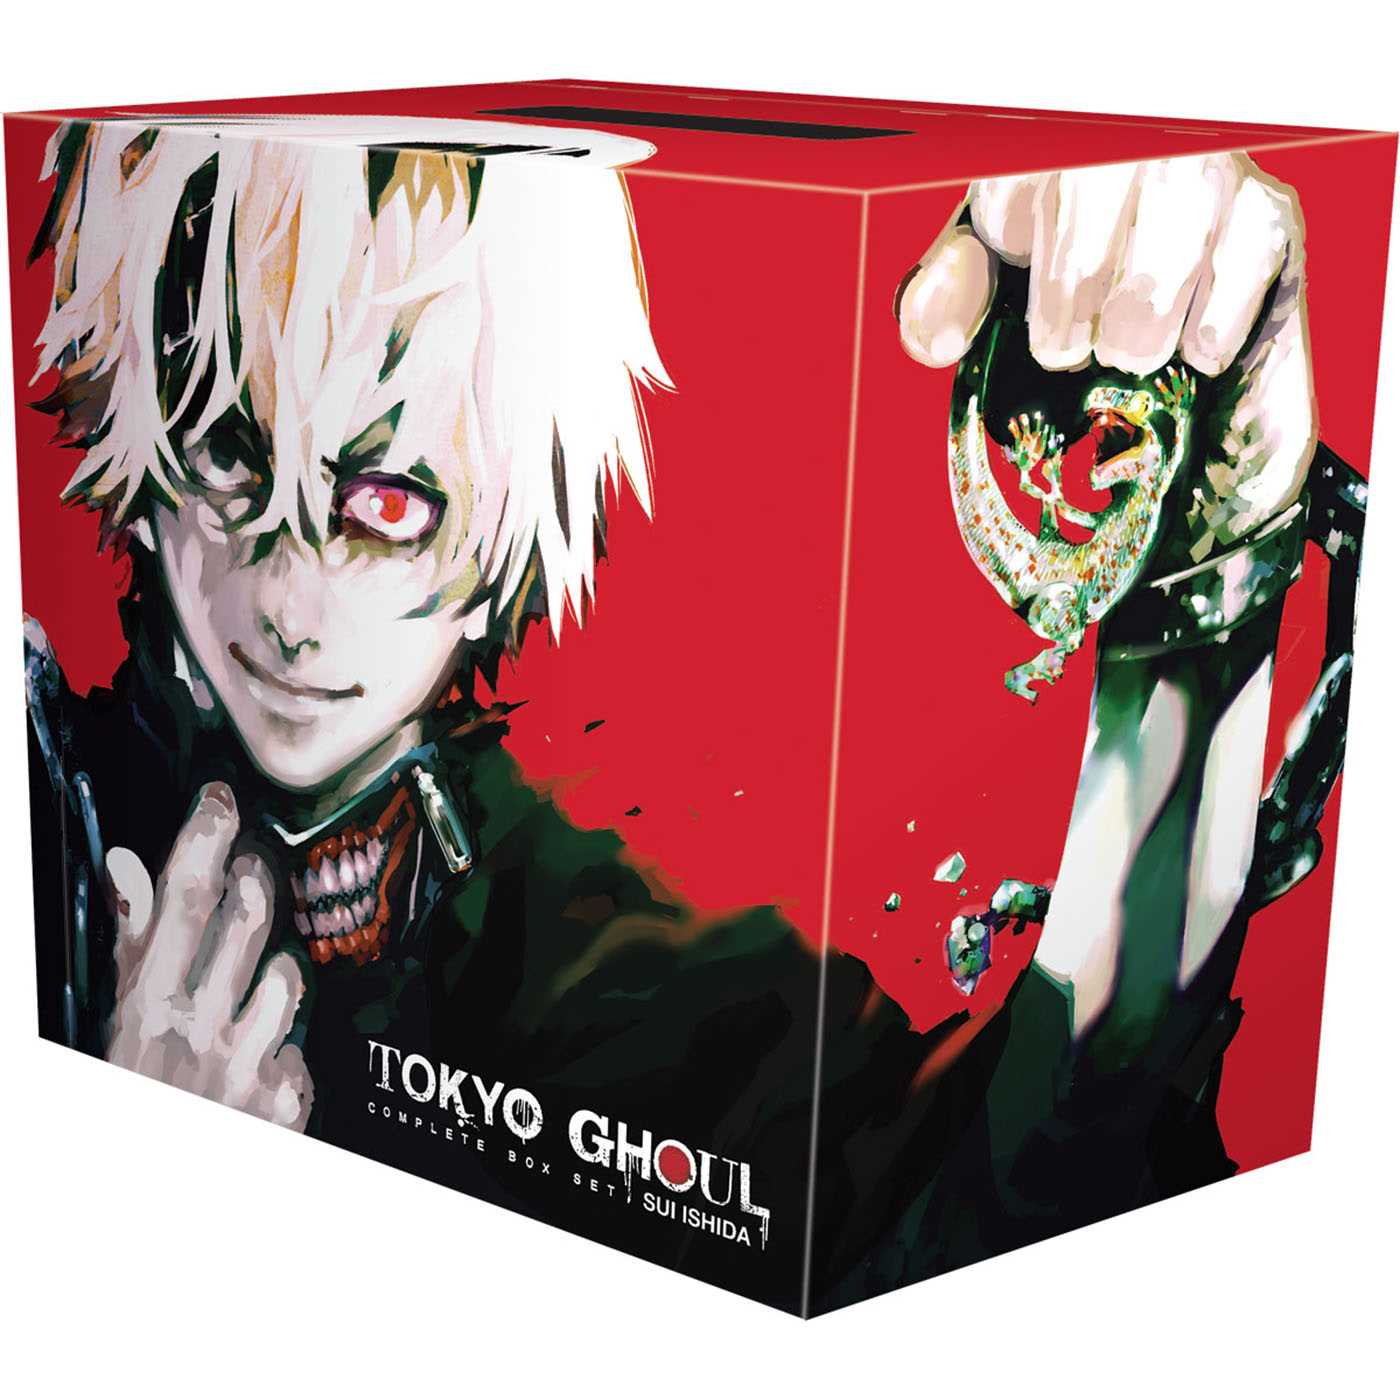 Tokyo Ghoul Complete Box Set : Includes vols. 1-14 with premium - Manga Warehouse